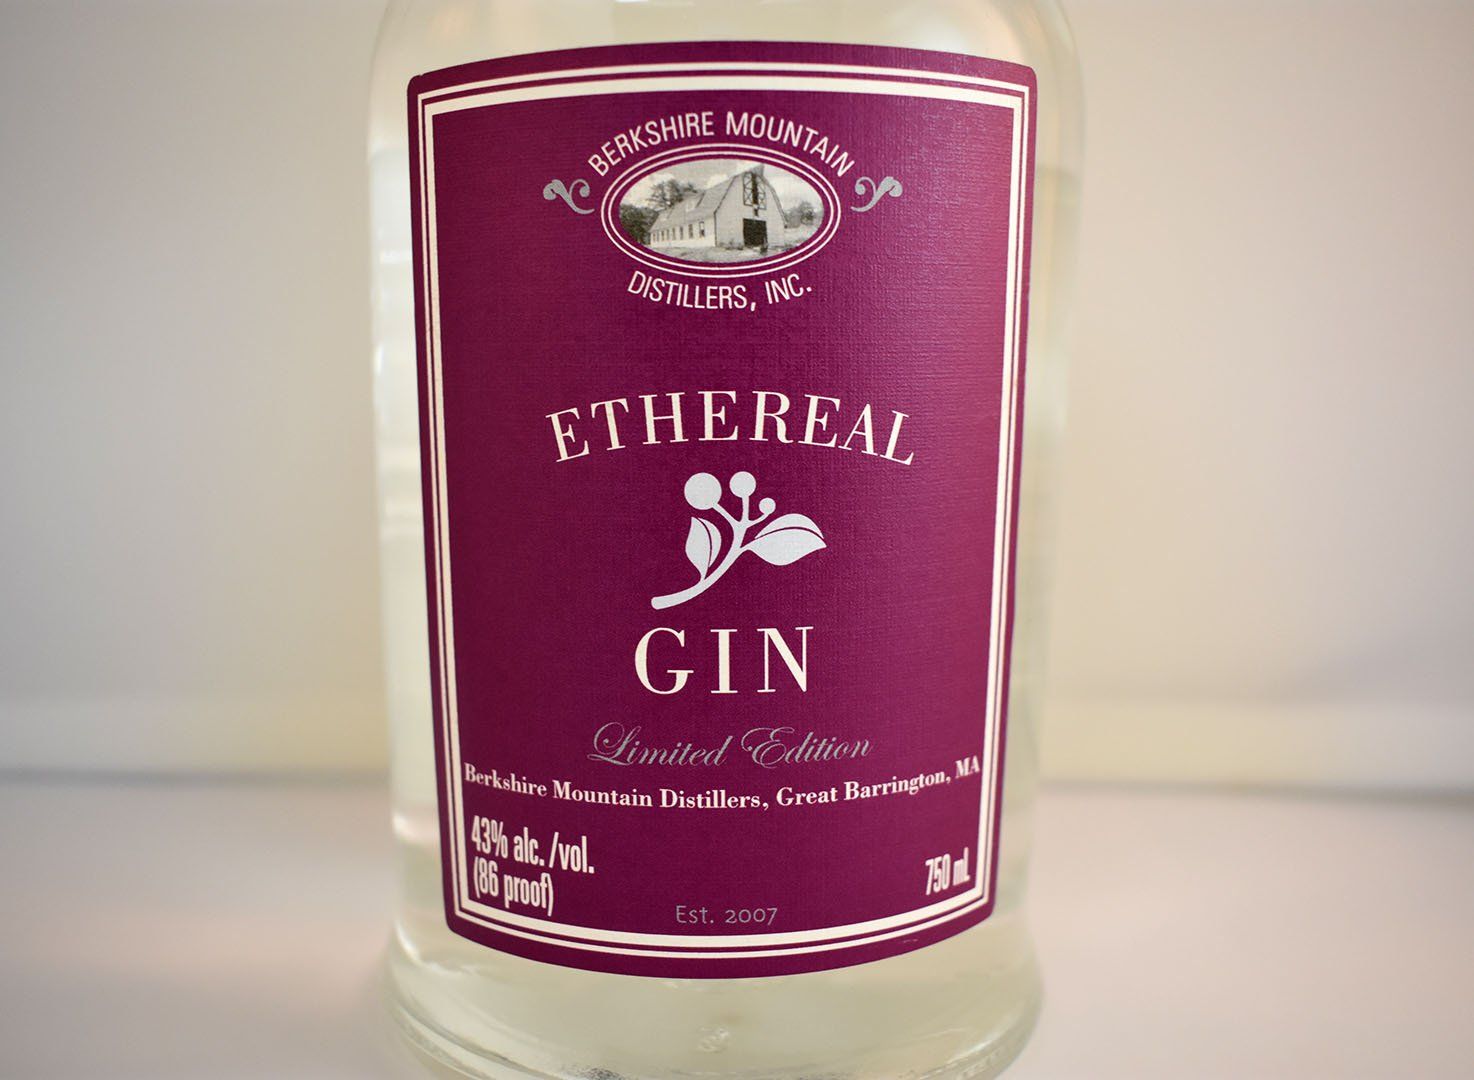 Limited Edition Ethereal Gin